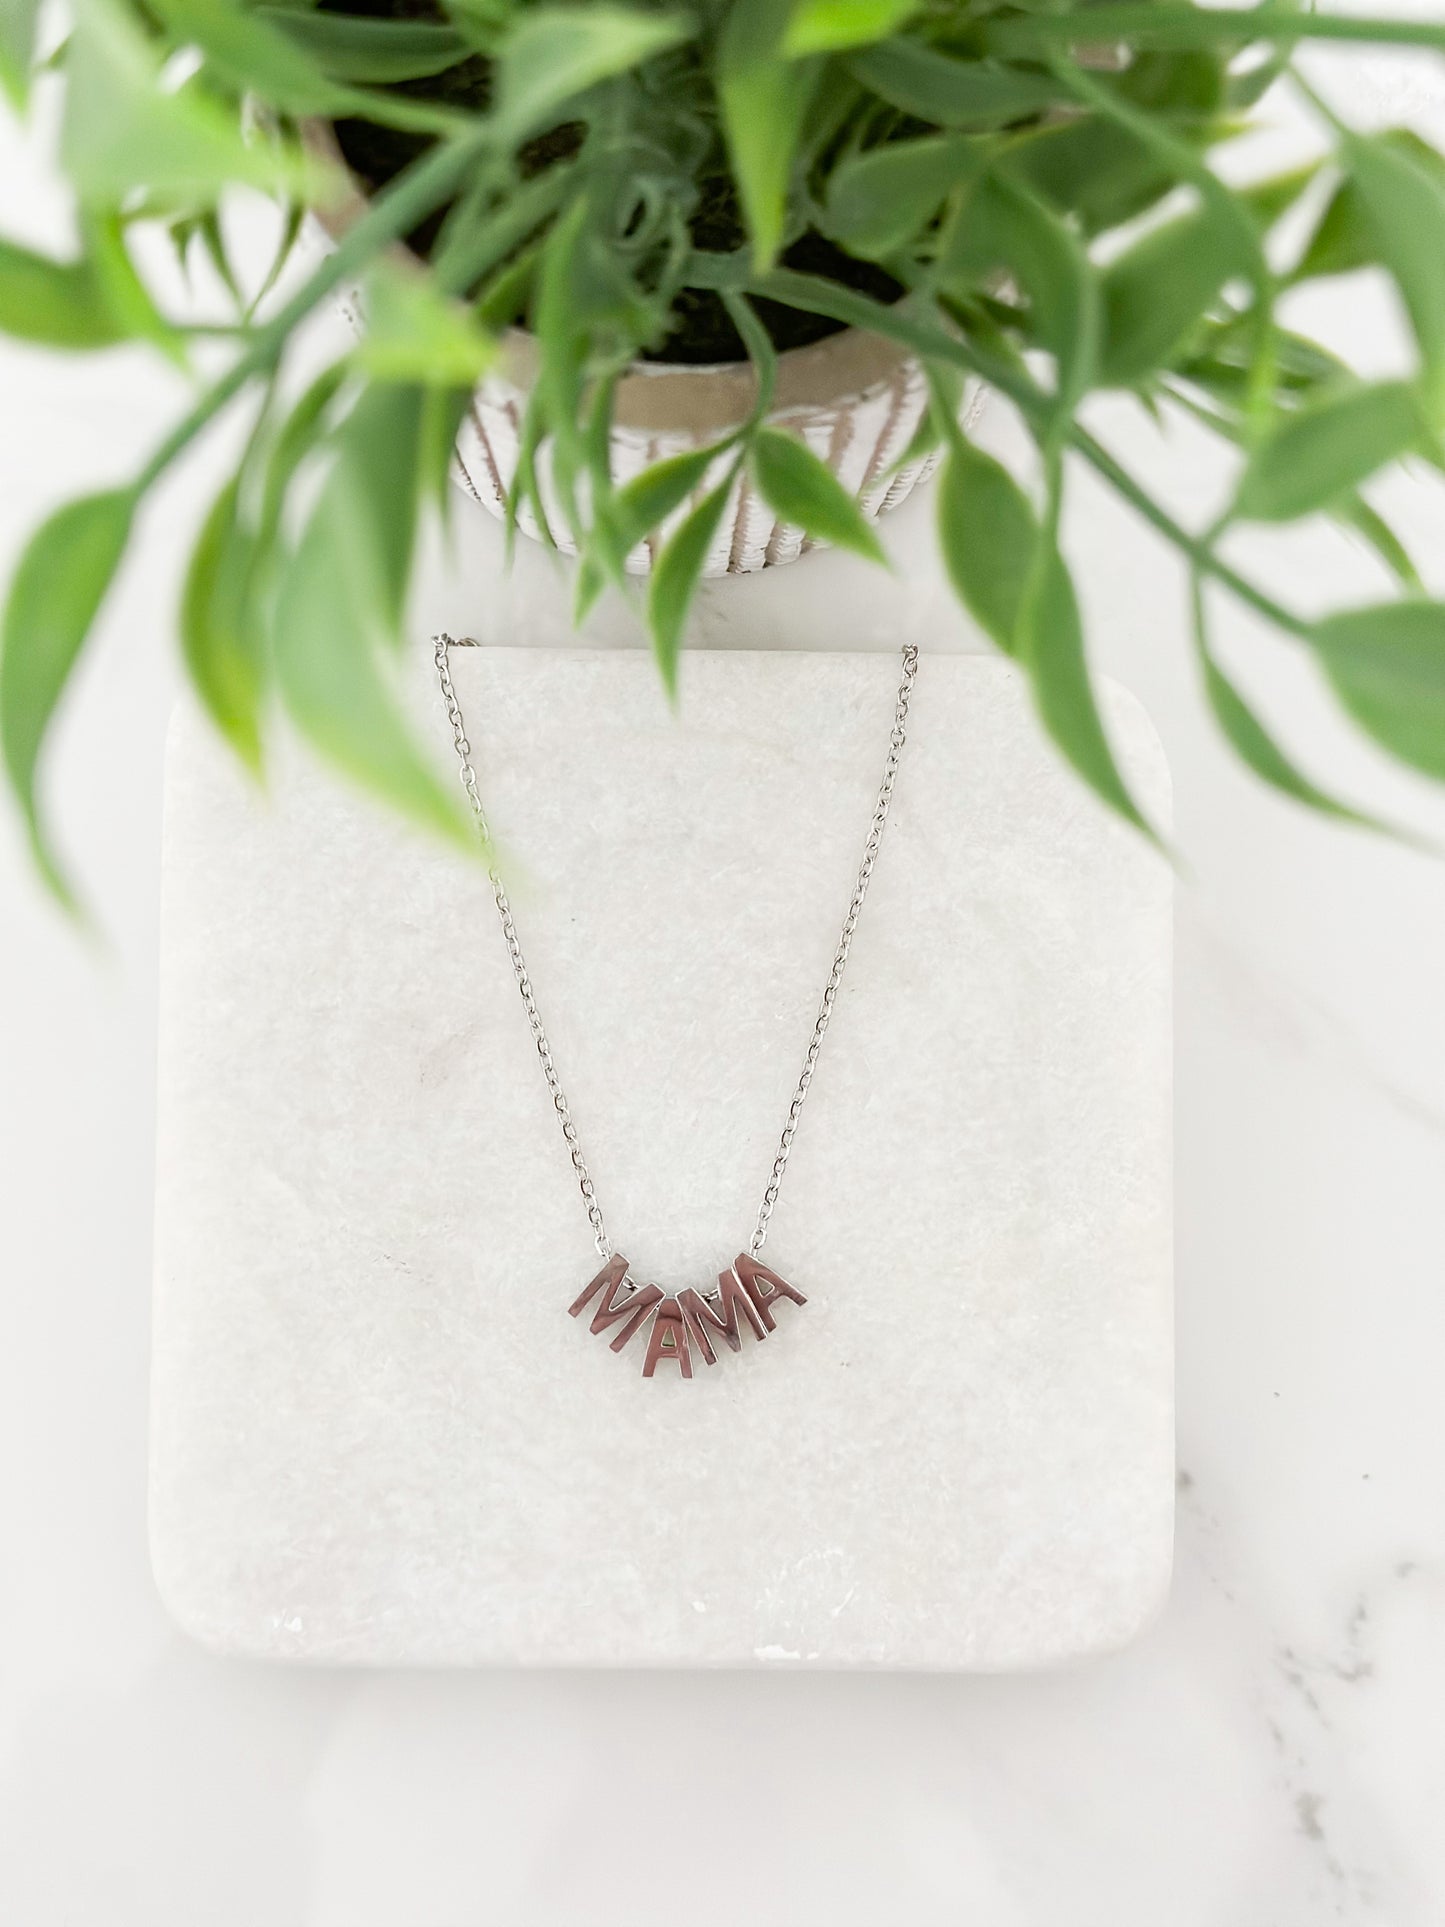 Sterling Silver Mama Necklace